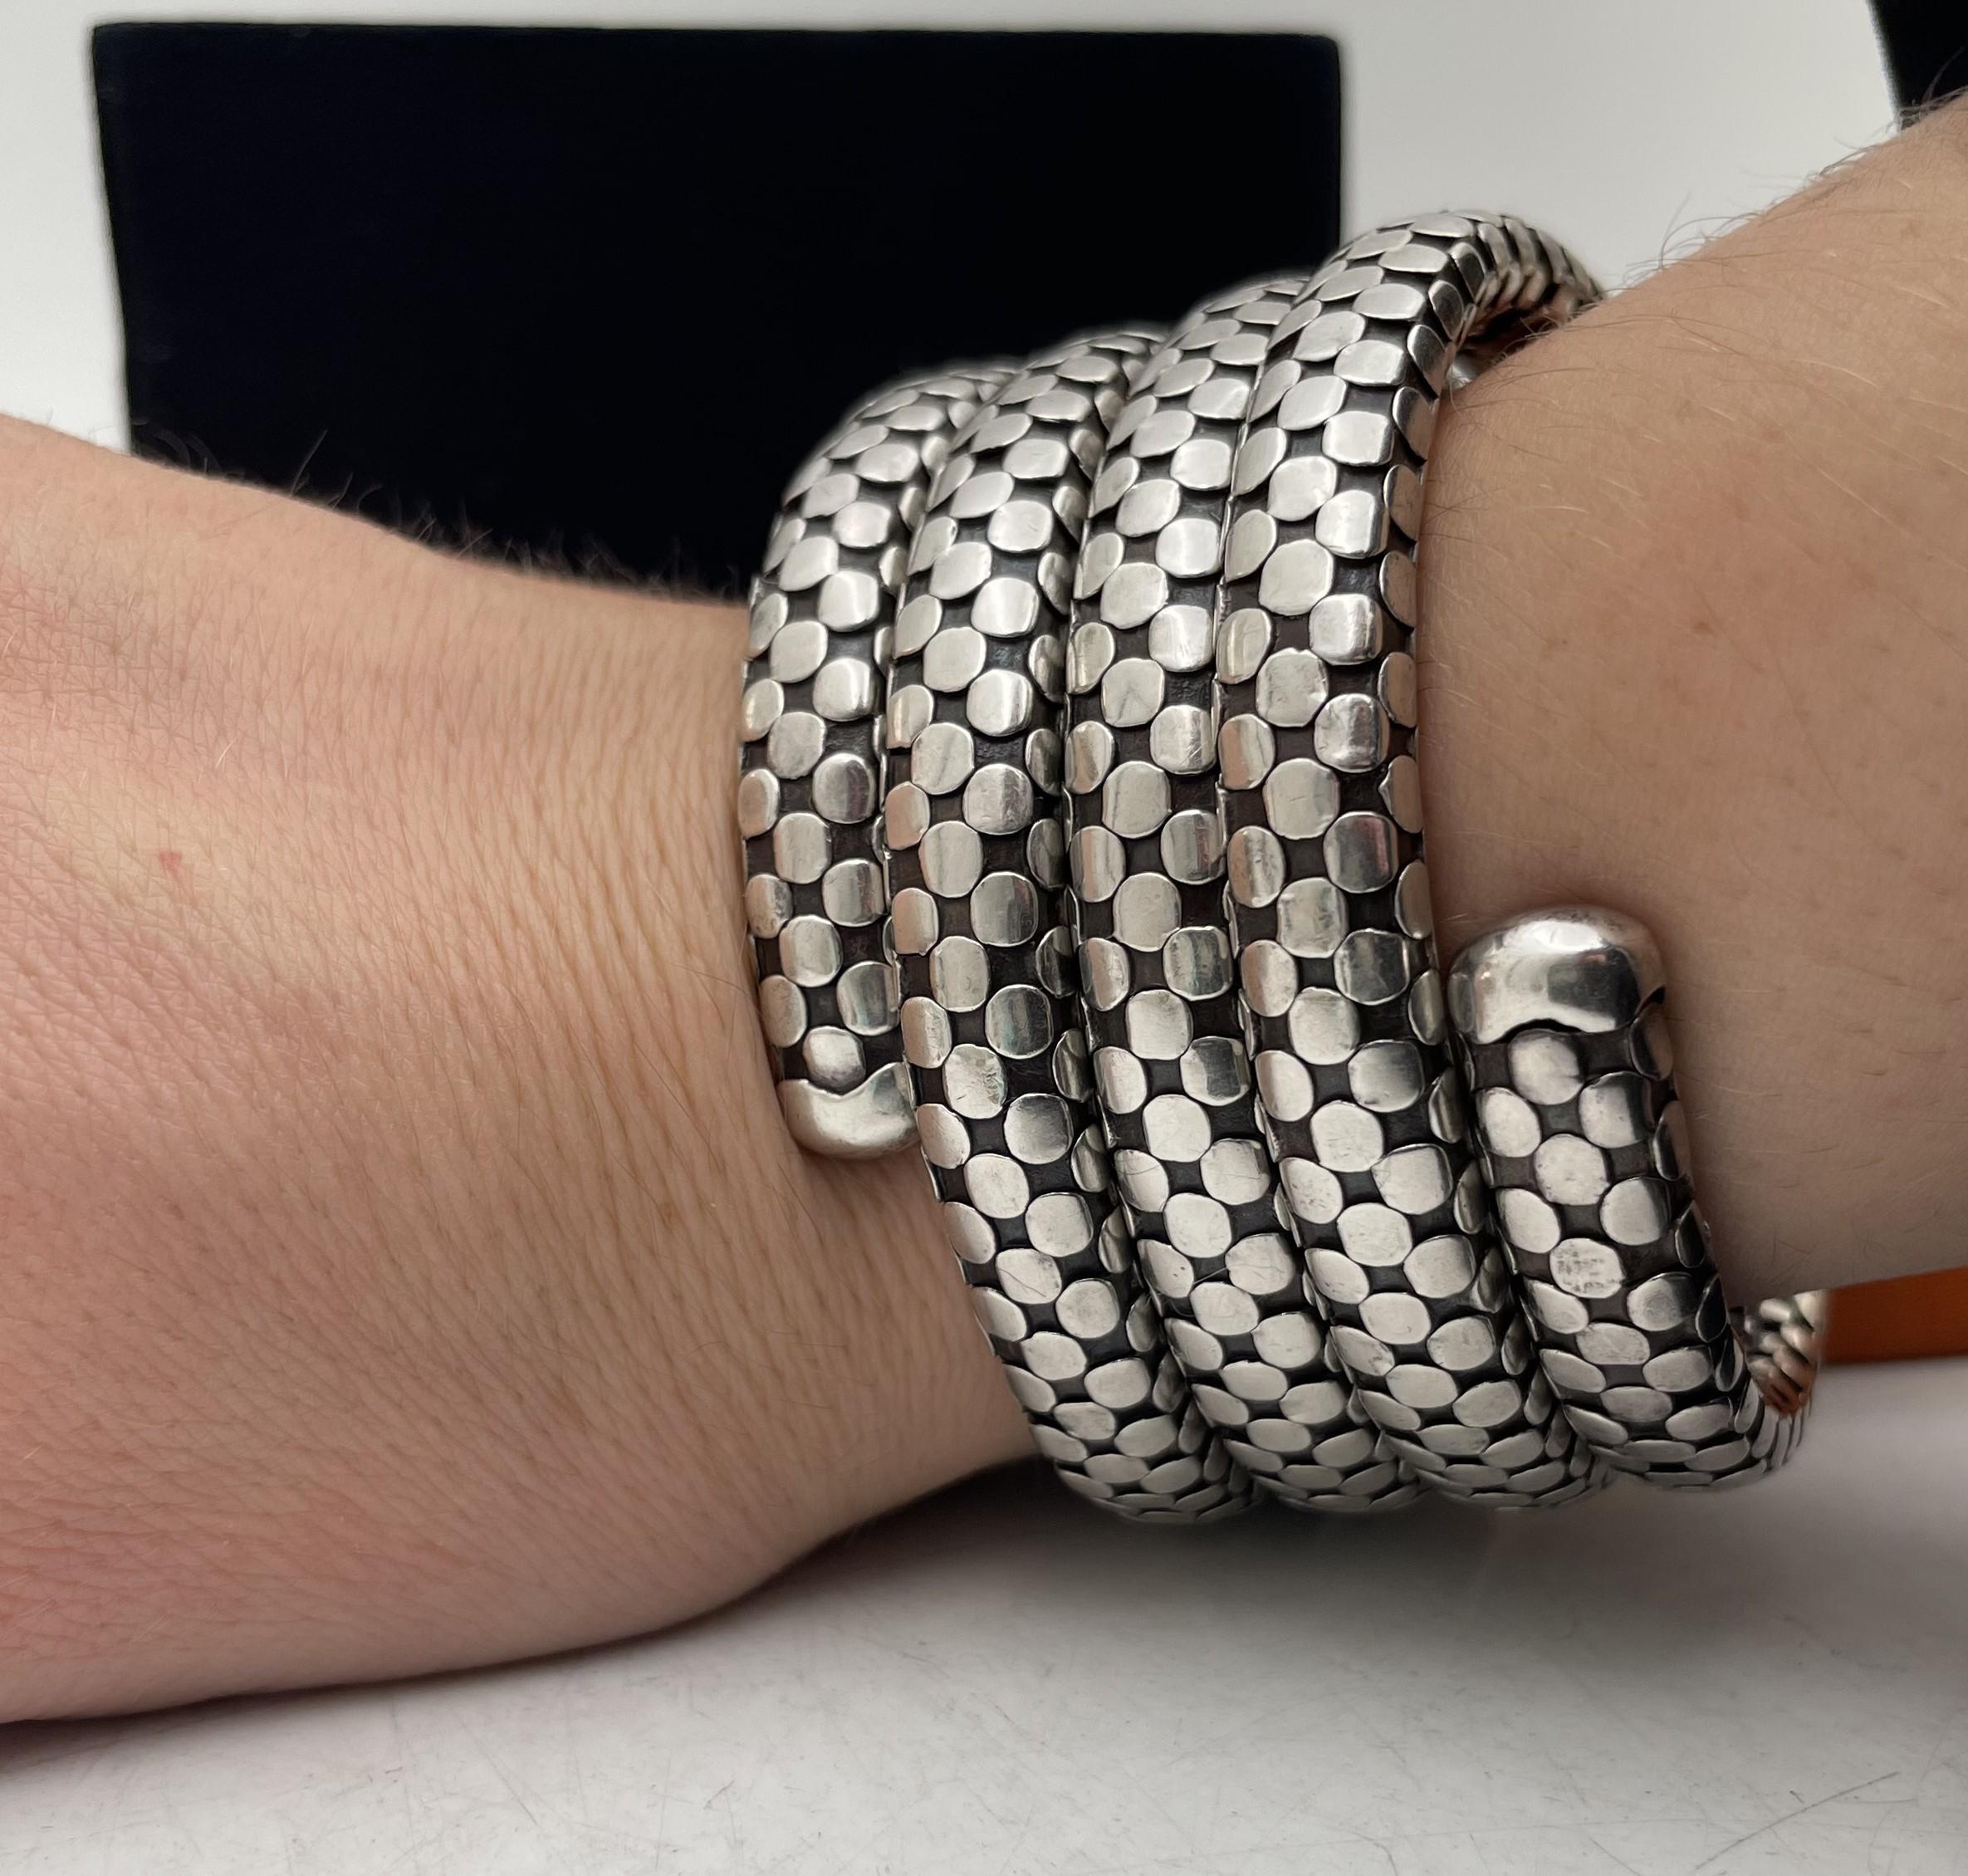 John Hardy sterling silver 4-coil dot flex wrap bracelet. It measures 2 1/4'' in expandable diameter by 1 3/4'' in height, is sold in its original box, and bears hallmarks as shown. 

Please feel free to ask us any questions, and please see our